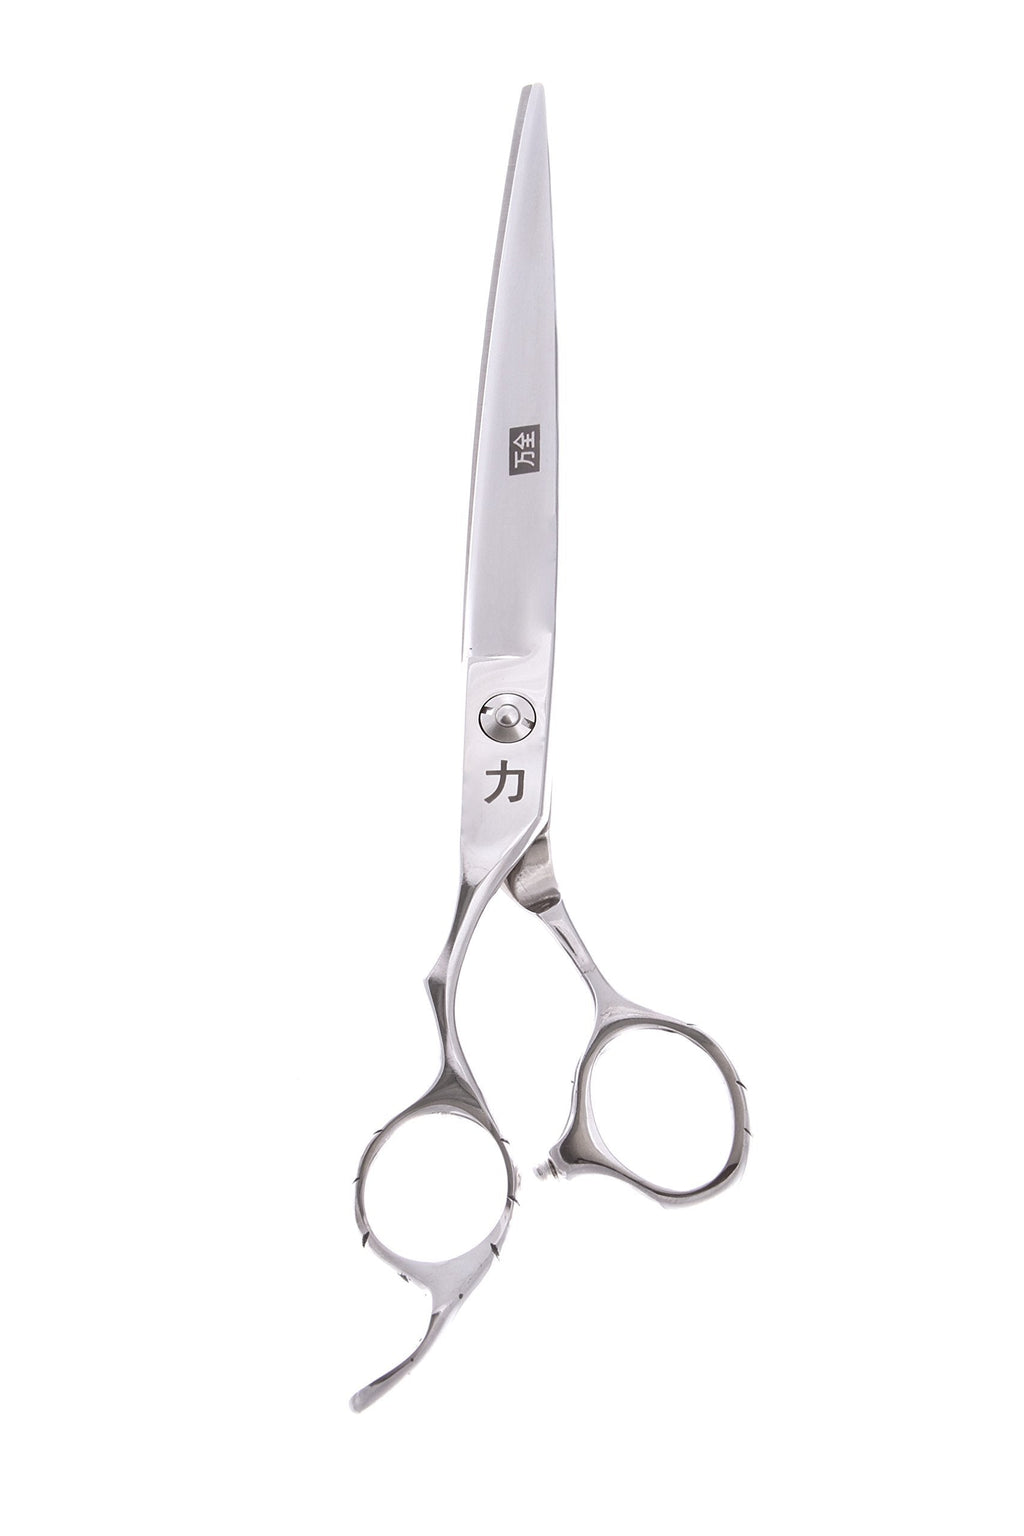 [Australia] - ShearsDirect Curved True Left Handed Professional Grooming Shear Scissors with an Ergonomic Handle Design, 8" 